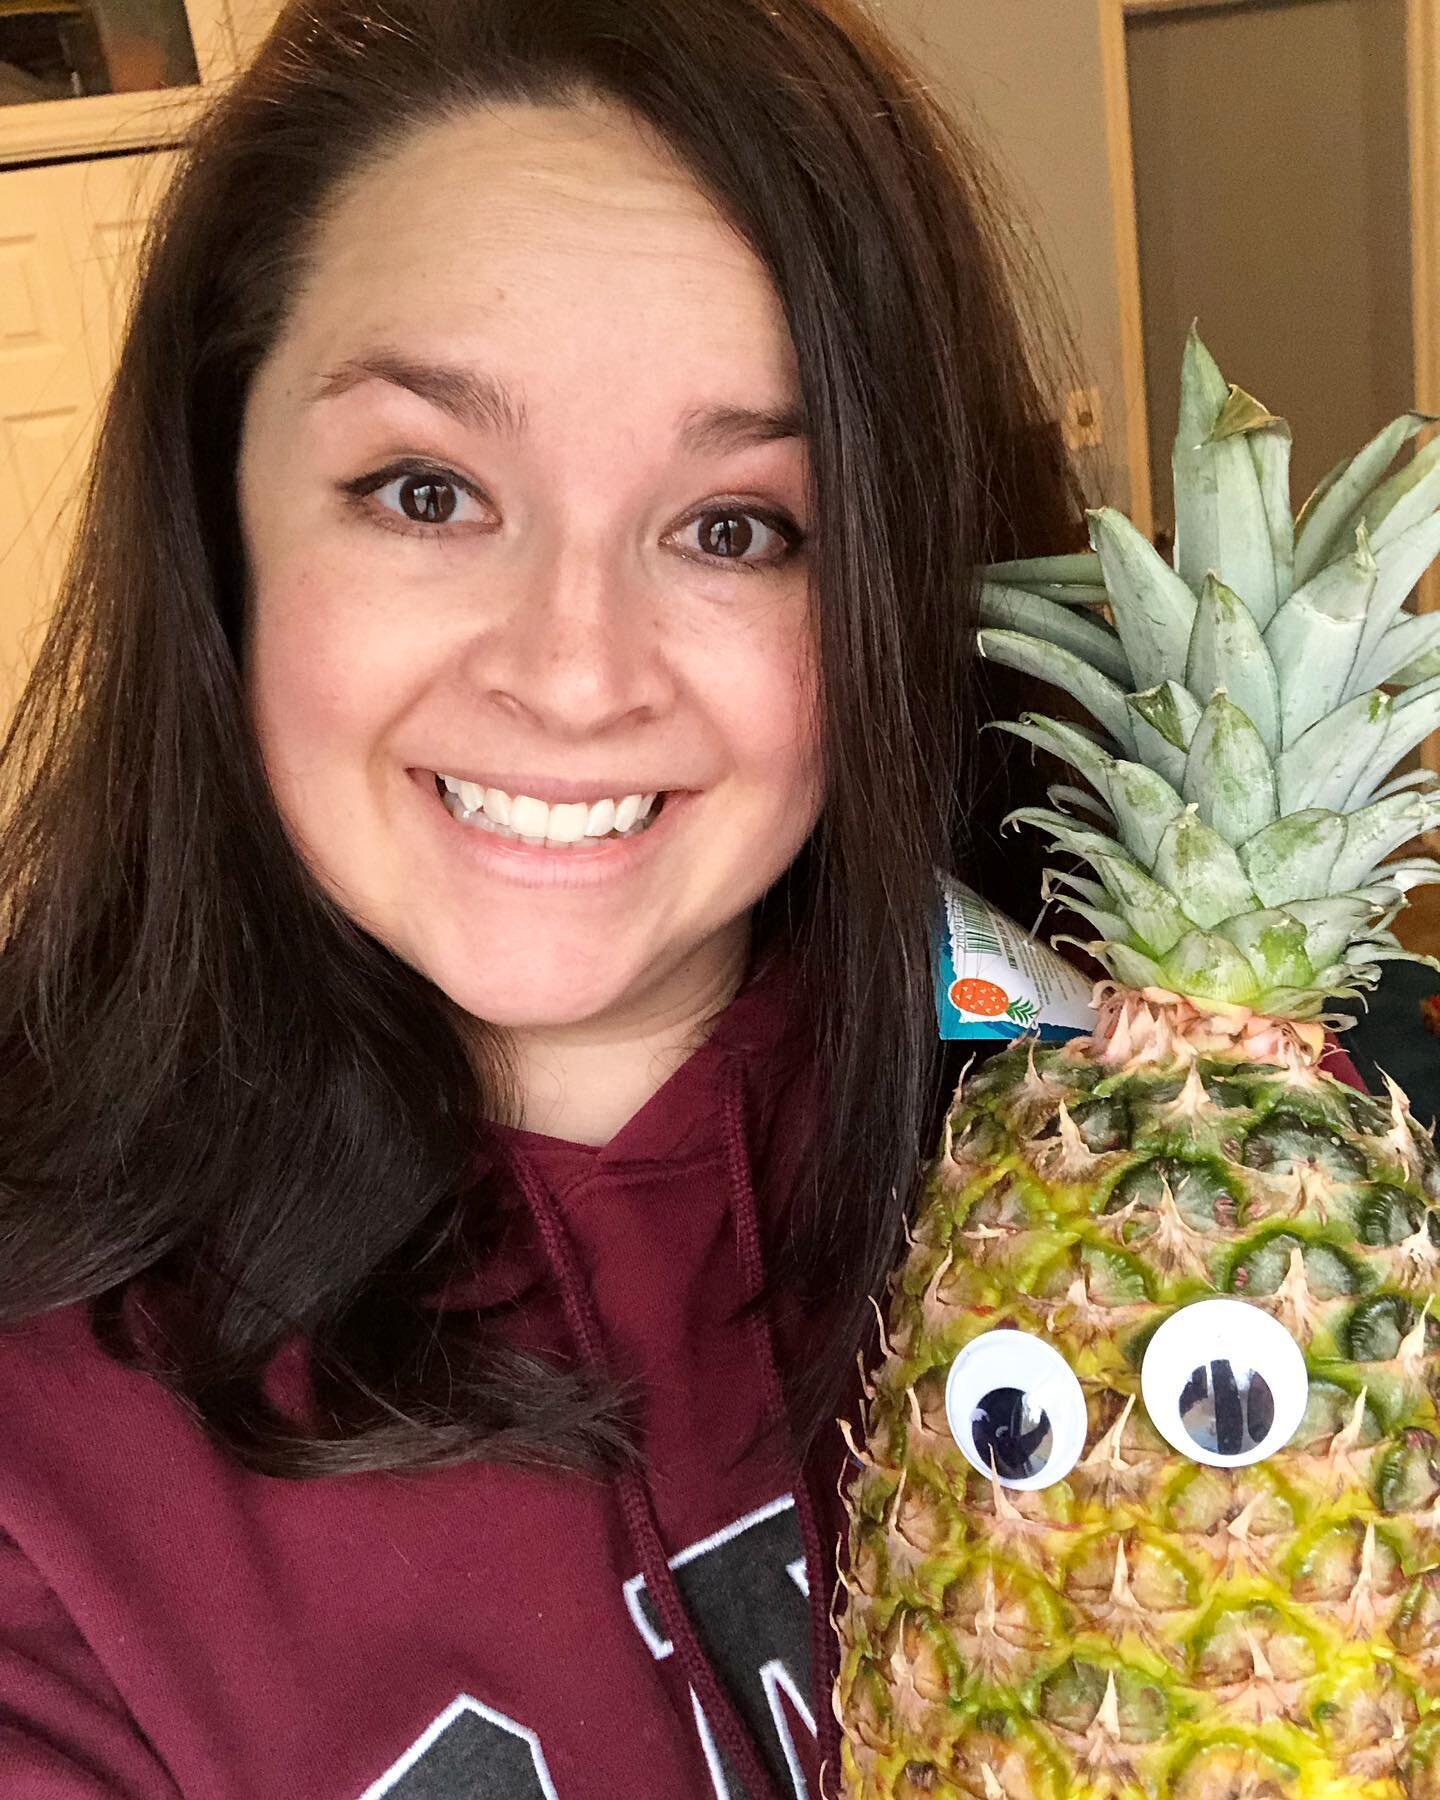 I found this in my kitchen. I&rsquo;m thinking this is my next author photo. 

#authorsofinstagram #writersofinstagram #authorphoto #pineapple #butwhy